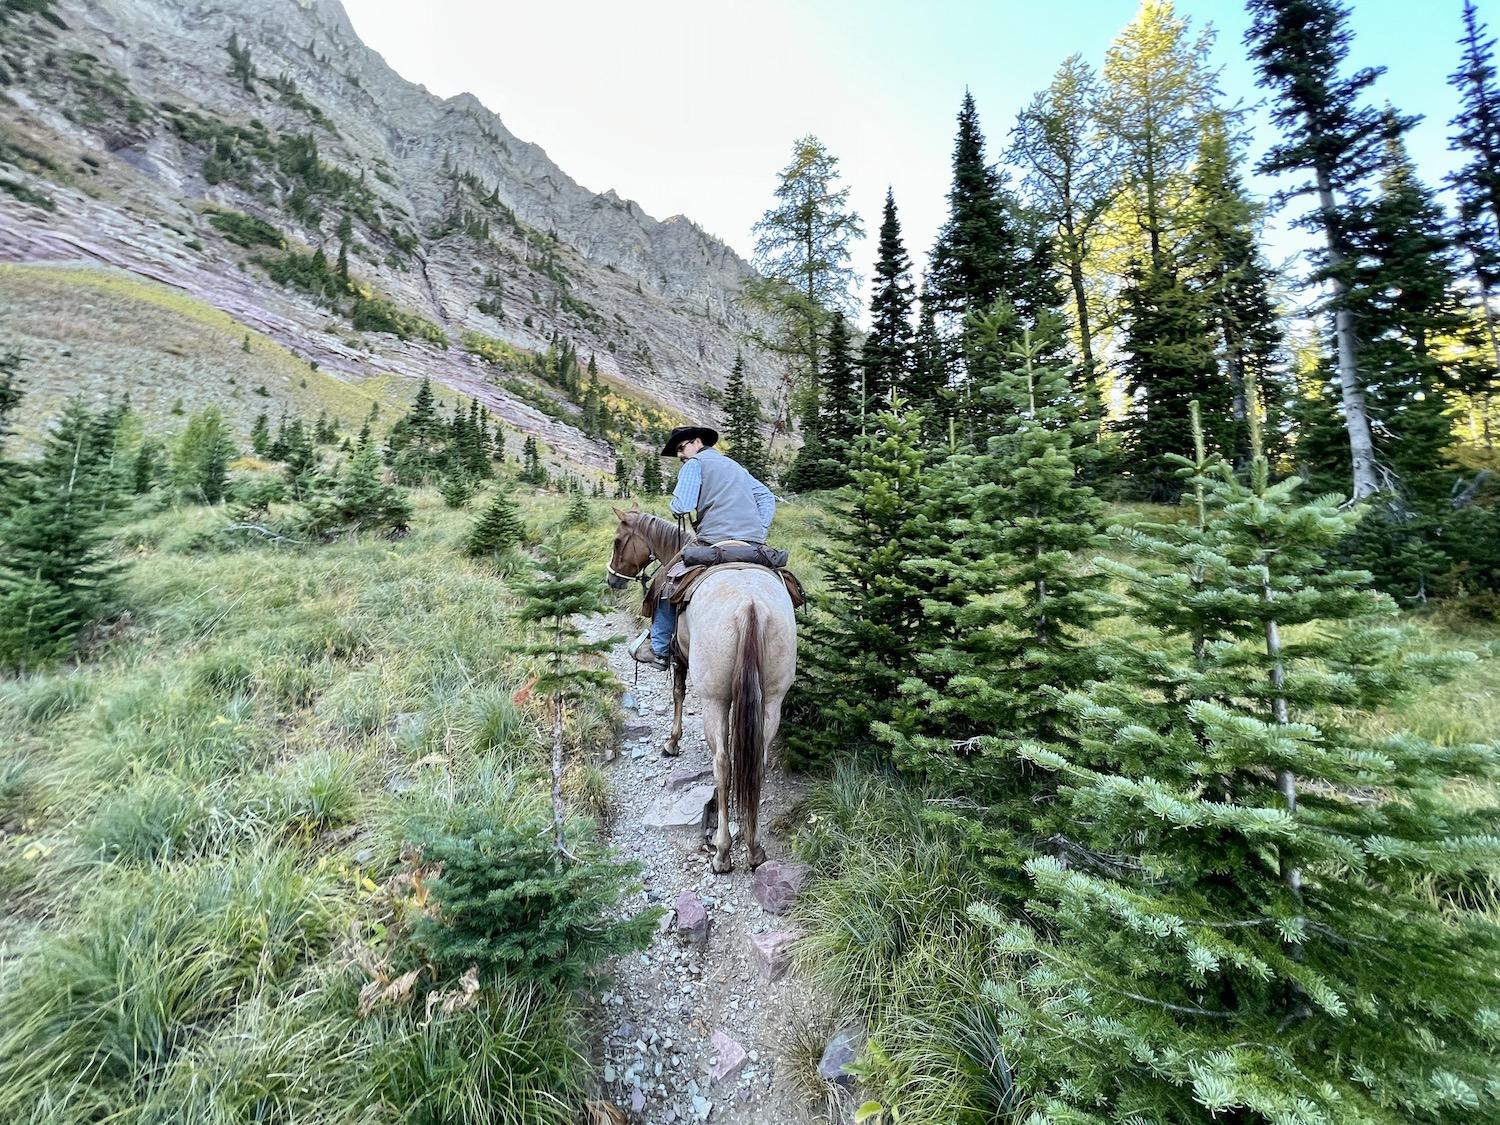 Josh Watson, from Alpine Stables, leads us to Twin Lakes in Waterton Lakes National Park.